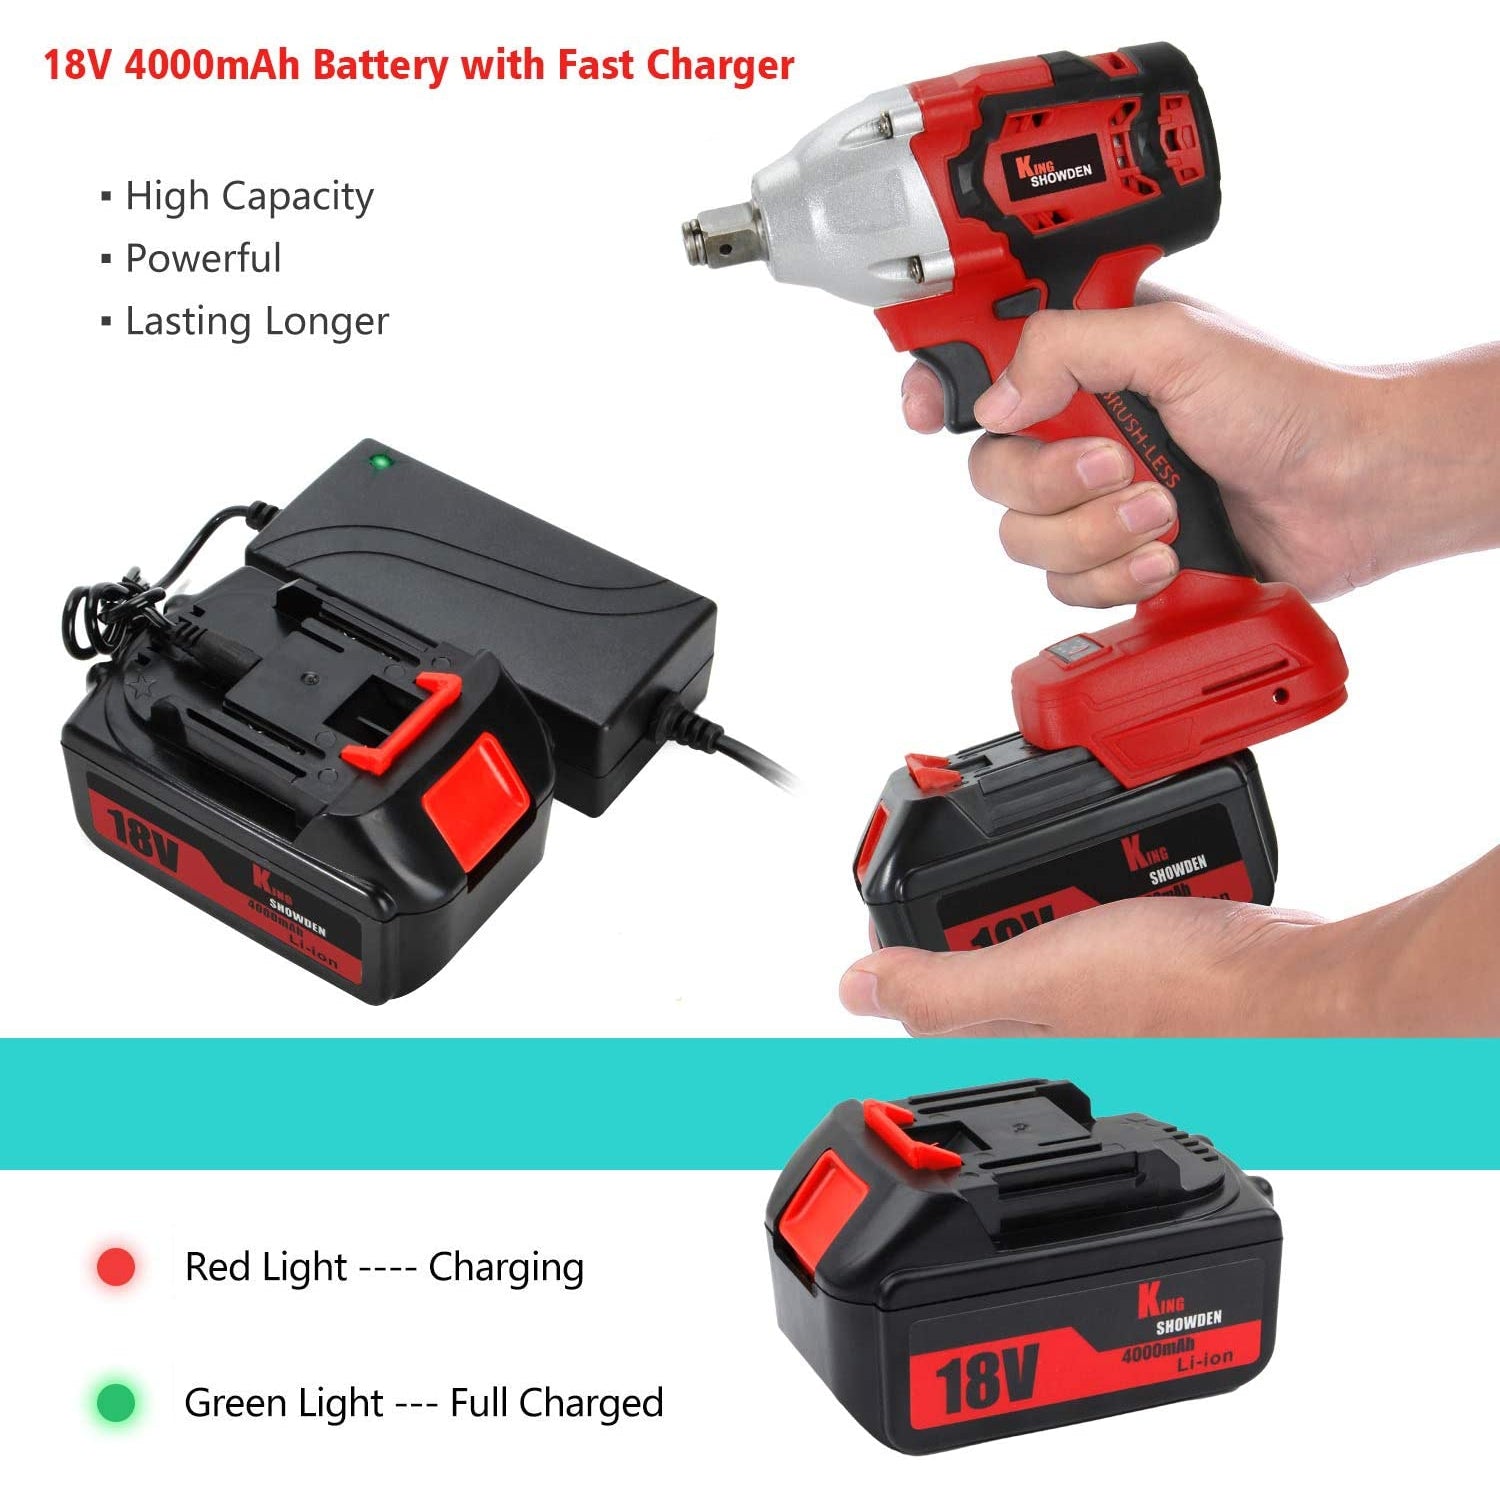 Kingshowden 18V Cordless Impact Driver Set and Carry Case